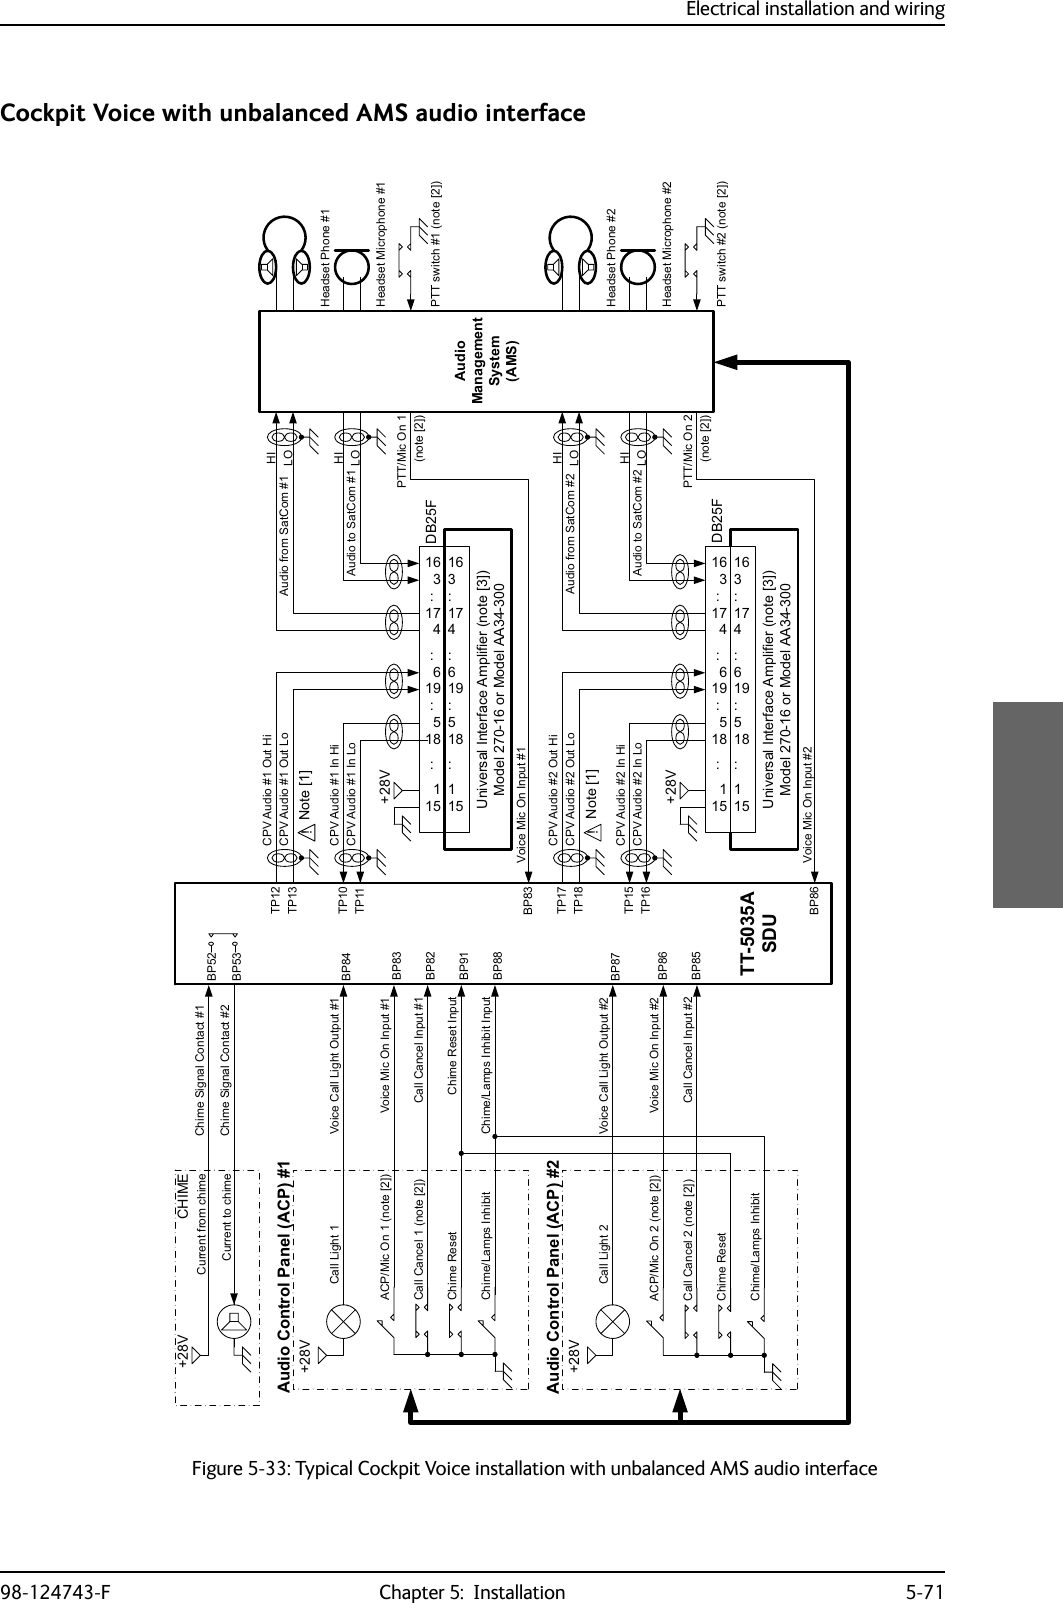 Electrical installation and wiring98-124743-F Chapter 5:  Installation 5-71Cockpit Voice with unbalanced AMS audio interfaceFigure 5-33: Typical Cockpit Voice installation with unbalanced AMS audio interface&amp;DOO/LJKW9$XGLR&amp;RQWURO3DQHO$&amp;39 &amp;+,0(&amp;XUUHQWIURPFKLPH&amp;XUUHQWWRFKLPH&amp;DOO&amp;DQFHOQRWH&gt;@$&amp;30LF2QQRWH&gt;@&amp;KLPH/DPSV,QKLELW&amp;KLPH5HVHW&amp;DOO/LJKW9$XGLR&amp;RQWURO3DQHO$&amp;3&amp;DOO&amp;DQFHOQRWH&gt;@$&amp;30LF2QQRWH&gt;@&amp;KLPH5HVHW&amp;KLPH/DPSV,QKLELW77$6&apos;8%3%3%3 737373731RWH&gt;@&apos;%)$XGLR0DQDJHPHQW6\VWHP$06+,/2+,/2+HDGVHW3KRQH+HDGVHW0LFURSKRQH377VZLWFKQRWH&gt;@98QLYHUVDO,QWHUIDFH$PSOLILHUQRWH&gt;@0RGHORU0RGHO$$73737373&amp;39$XGLR2XW+L$XGLRWR6DW&amp;RP+,/2$XGLRIURP6DW&amp;RP+,/21RWH&gt;@+HDGVHW3KRQH+HDGVHW0LFURSKRQH377VZLWFKQRWH&gt;@98QLYHUVDO,QWHUIDFH$PSOLILHUQRWH&gt;@0RGHORU0RGHO$$&apos;%)%3%3%3%3%3%3%3%3%33770LF2Q3770LF2QQRWH&gt;@QRWH&gt;@&amp;39$XGLR2XW/R&amp;39$XGLR,Q+L&amp;39$XGLR,Q/R&amp;39$XGLR2XW+L&amp;39$XGLR2XW/R&amp;39$XGLR,Q+L&amp;39$XGLR,Q/R$XGLRIURP6DW&amp;RP$XGLRWR6DW&amp;RP9RLFH0LF2Q,QSXW9RLFH0LF2Q,QSXW&amp;KLPH6LJQDO&amp;RQWDFW&amp;KLPH6LJQDO&amp;RQWDFW9RLFH&amp;DOO/LJKW2XWSXW9RLFH0LF2Q,QSXW&amp;DOO&amp;DQFHO,QSXW&amp;KLPH5HVHW,QSXW&amp;KLPH/DPSV,QKLELW,QSXW9RLFH&amp;DOO/LJKW2XWSXW9RLFH0LF2Q,QSXW&amp;DOO&amp;DQFHO,QSXW